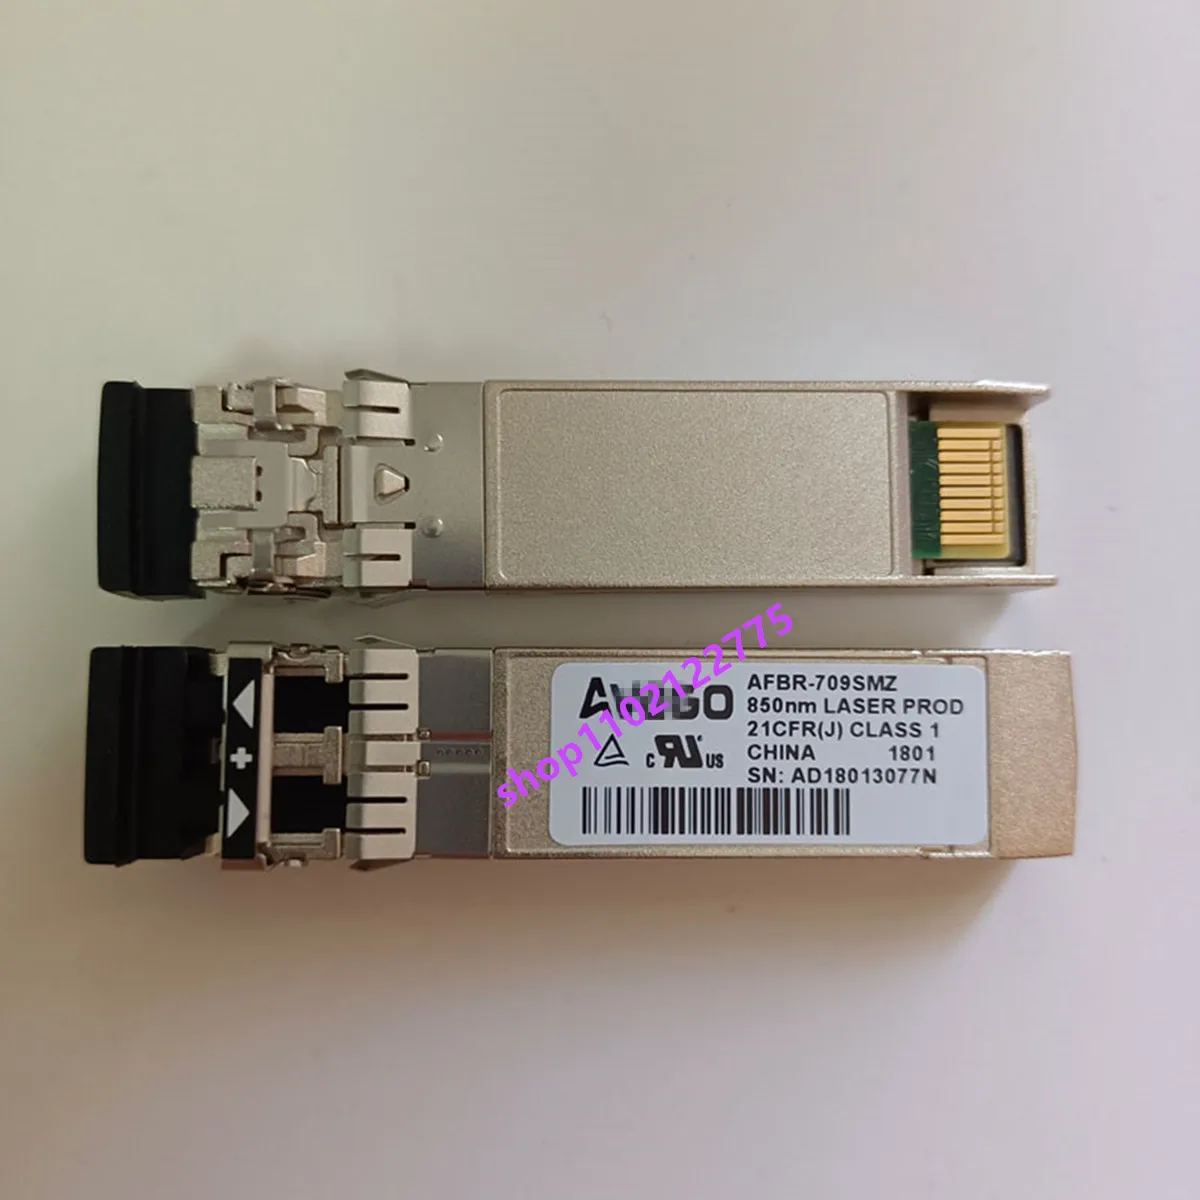 AVAGO sfp 10gb adapter switch AFBR-709SMZ 850nm lc-lc sfp 10G network adapter general switch /avago 10g sfp/avago fiber switch enlarge